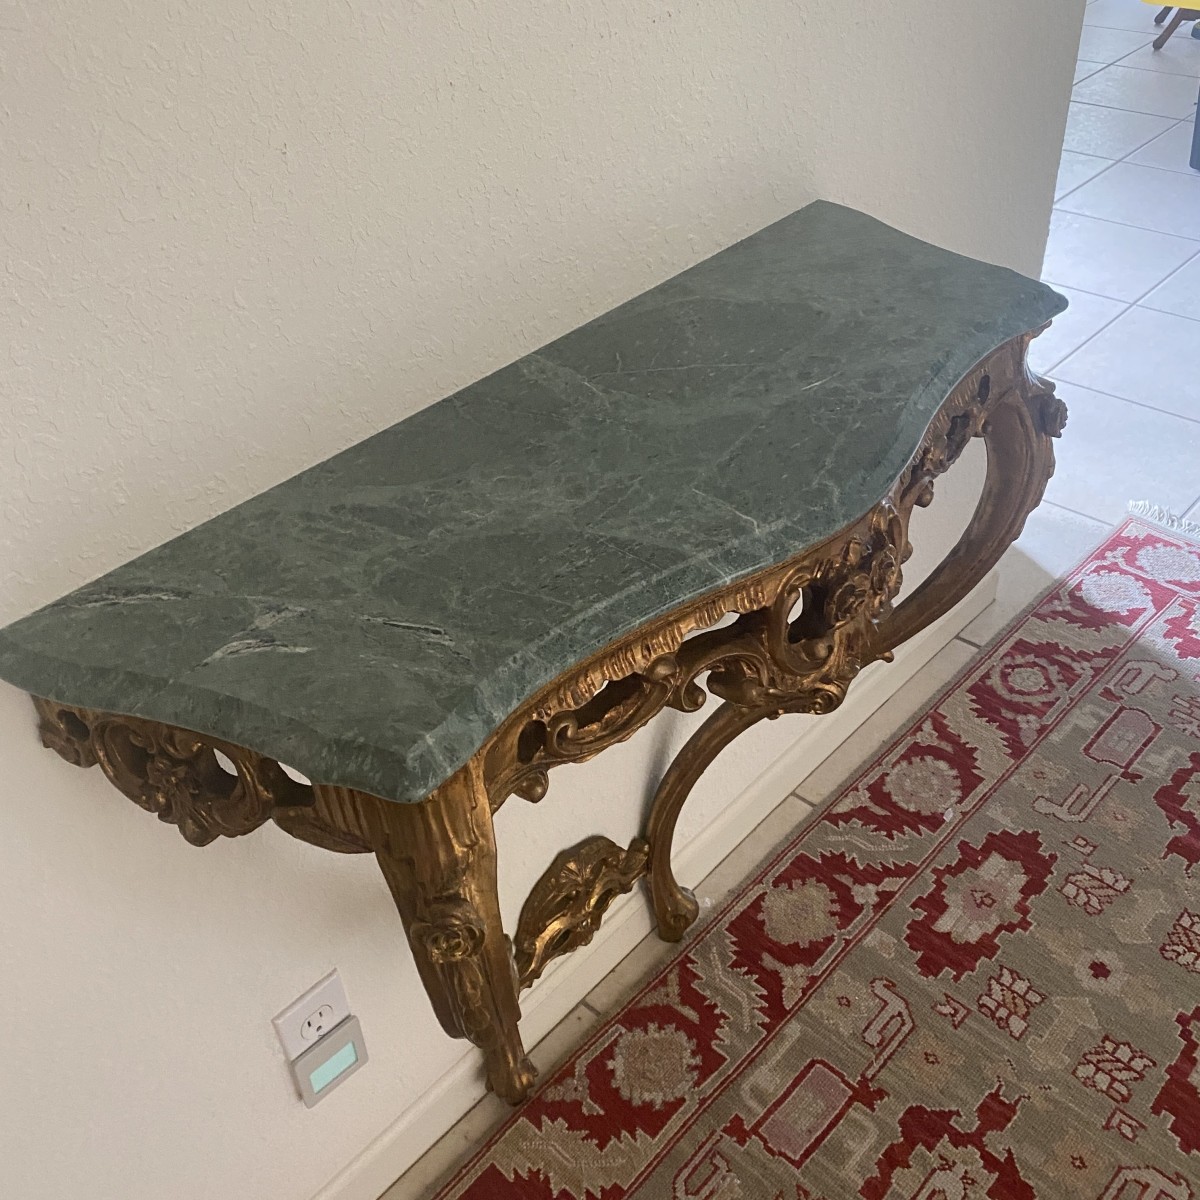 Louis XV Style Console Table